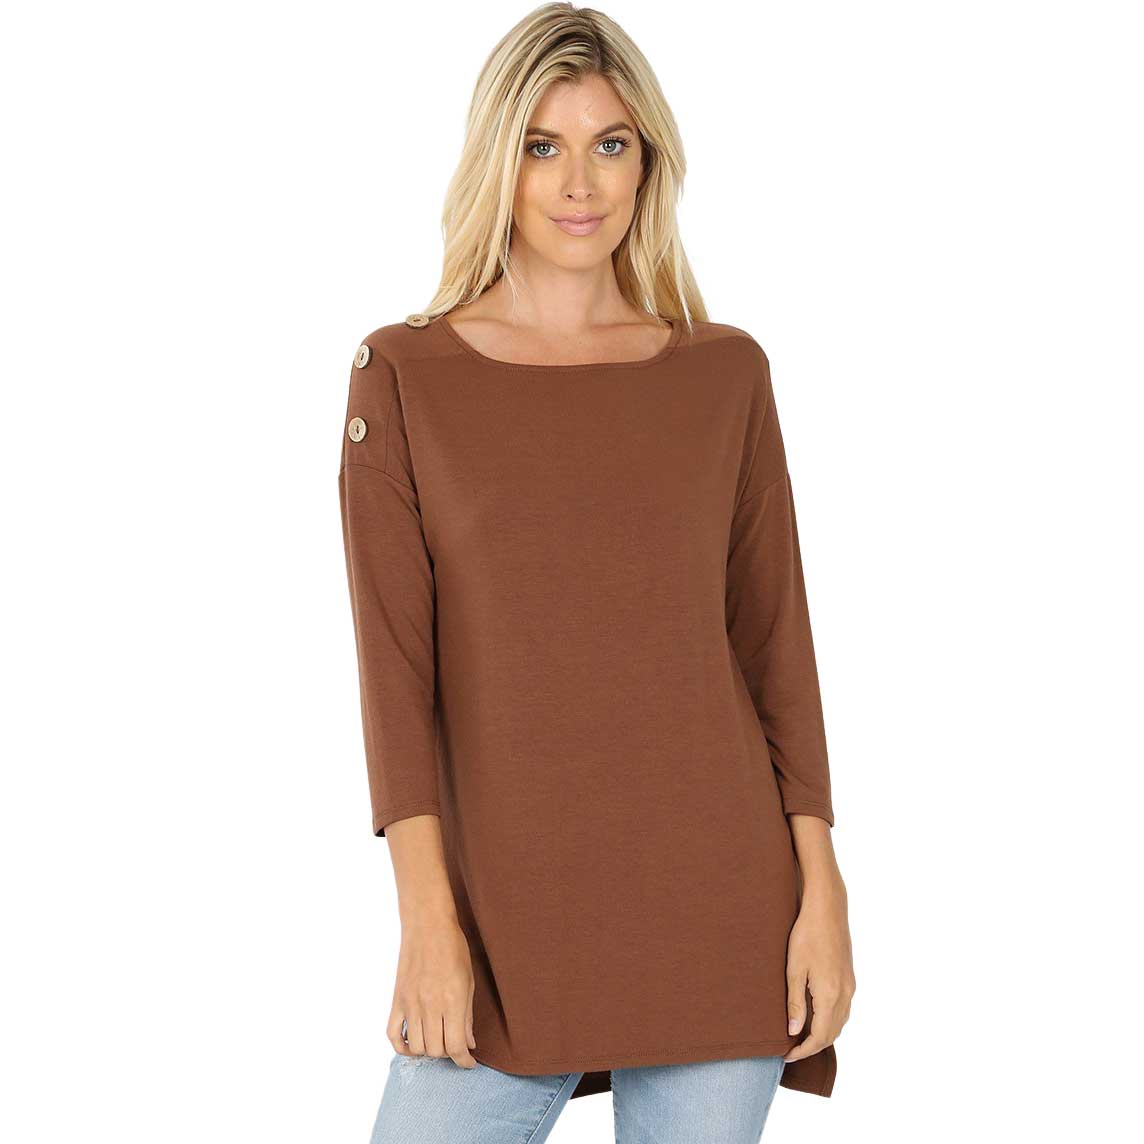 LIGHT BROWN Boat Neck Hi-Lo Top w/ Wooden Buttons 2082